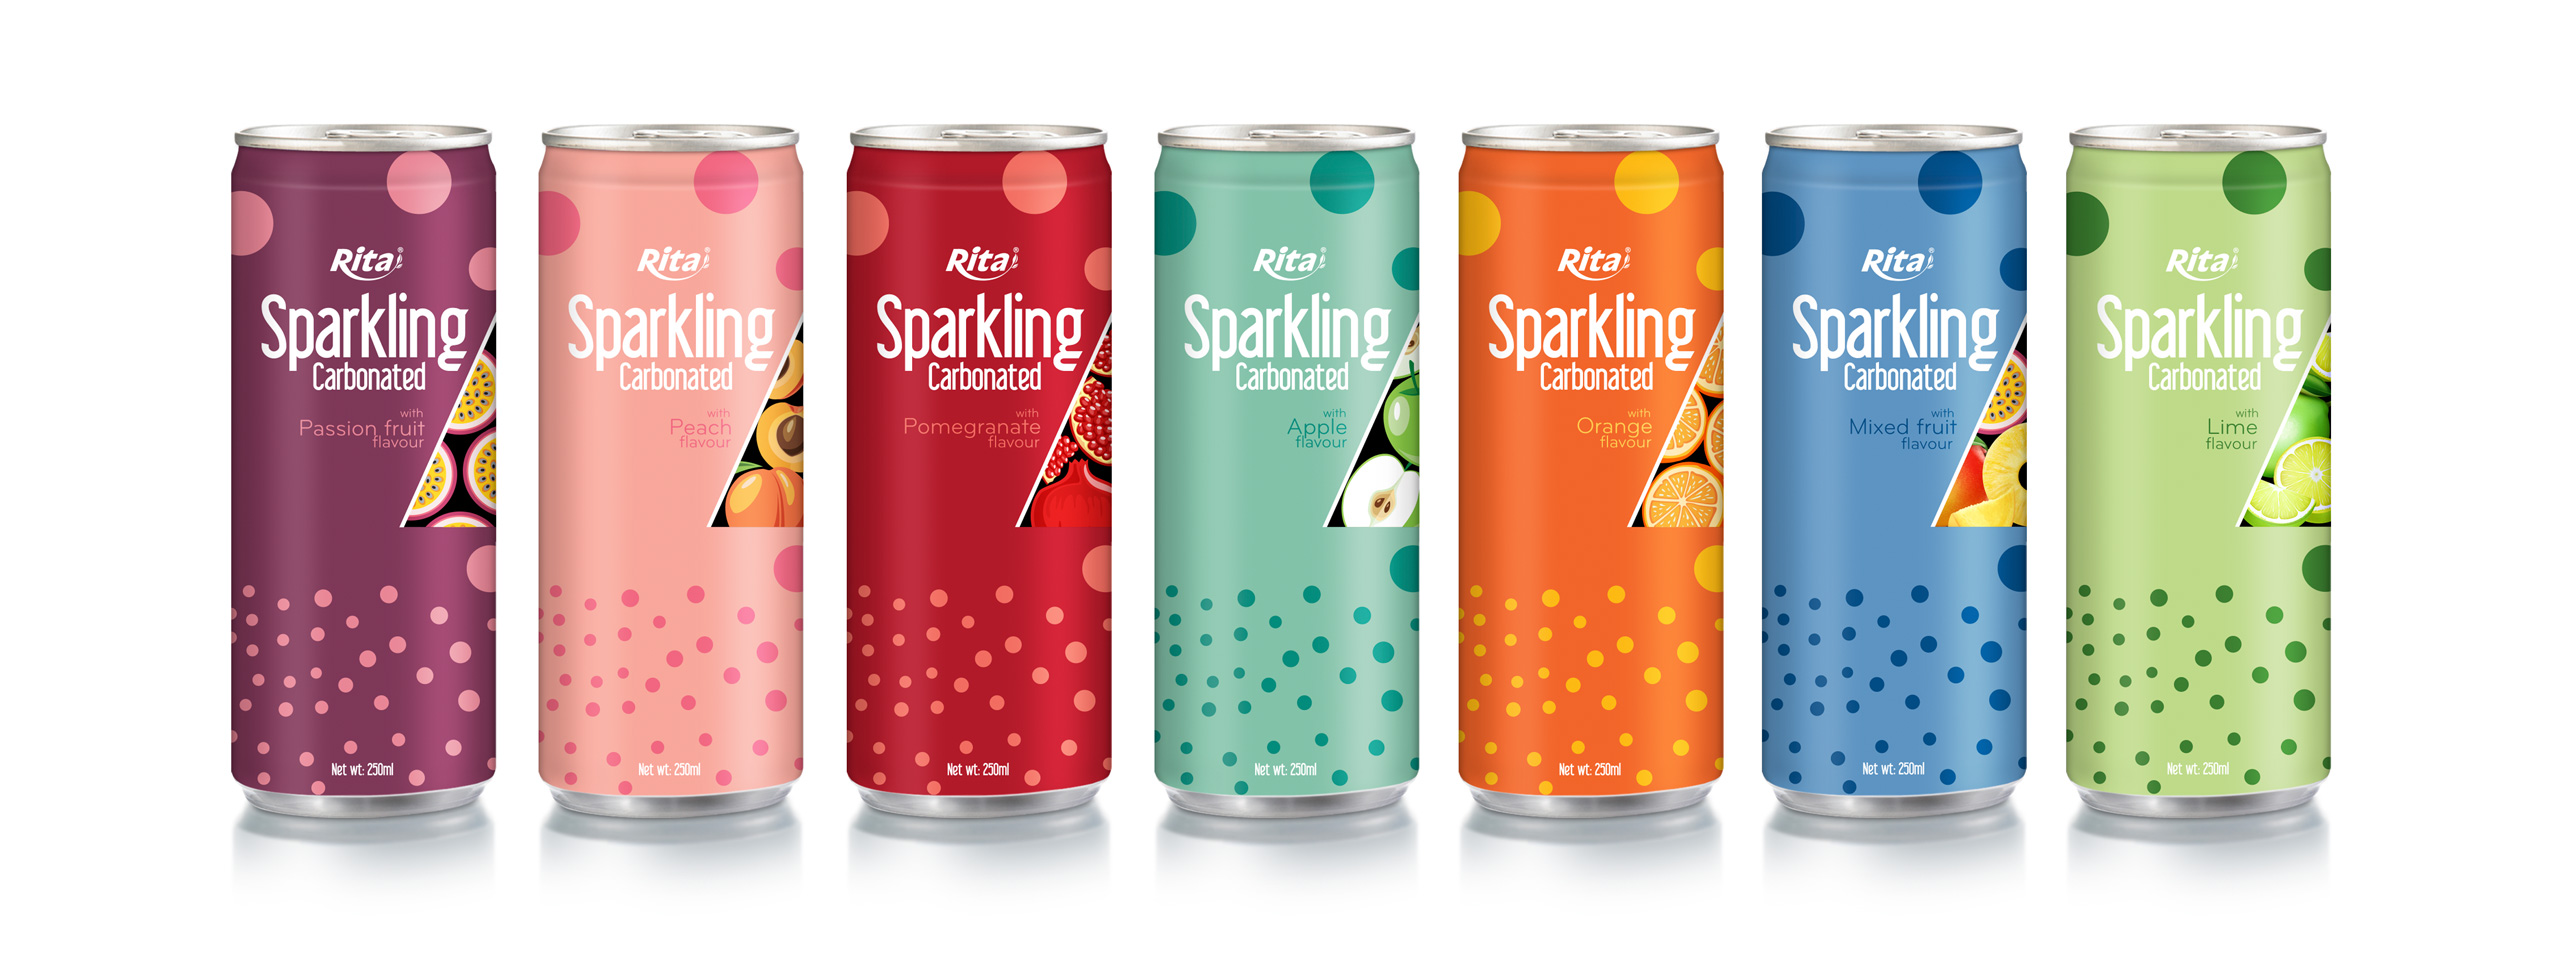 sparkling carbonated with pomegranate flavor 250ml slim can